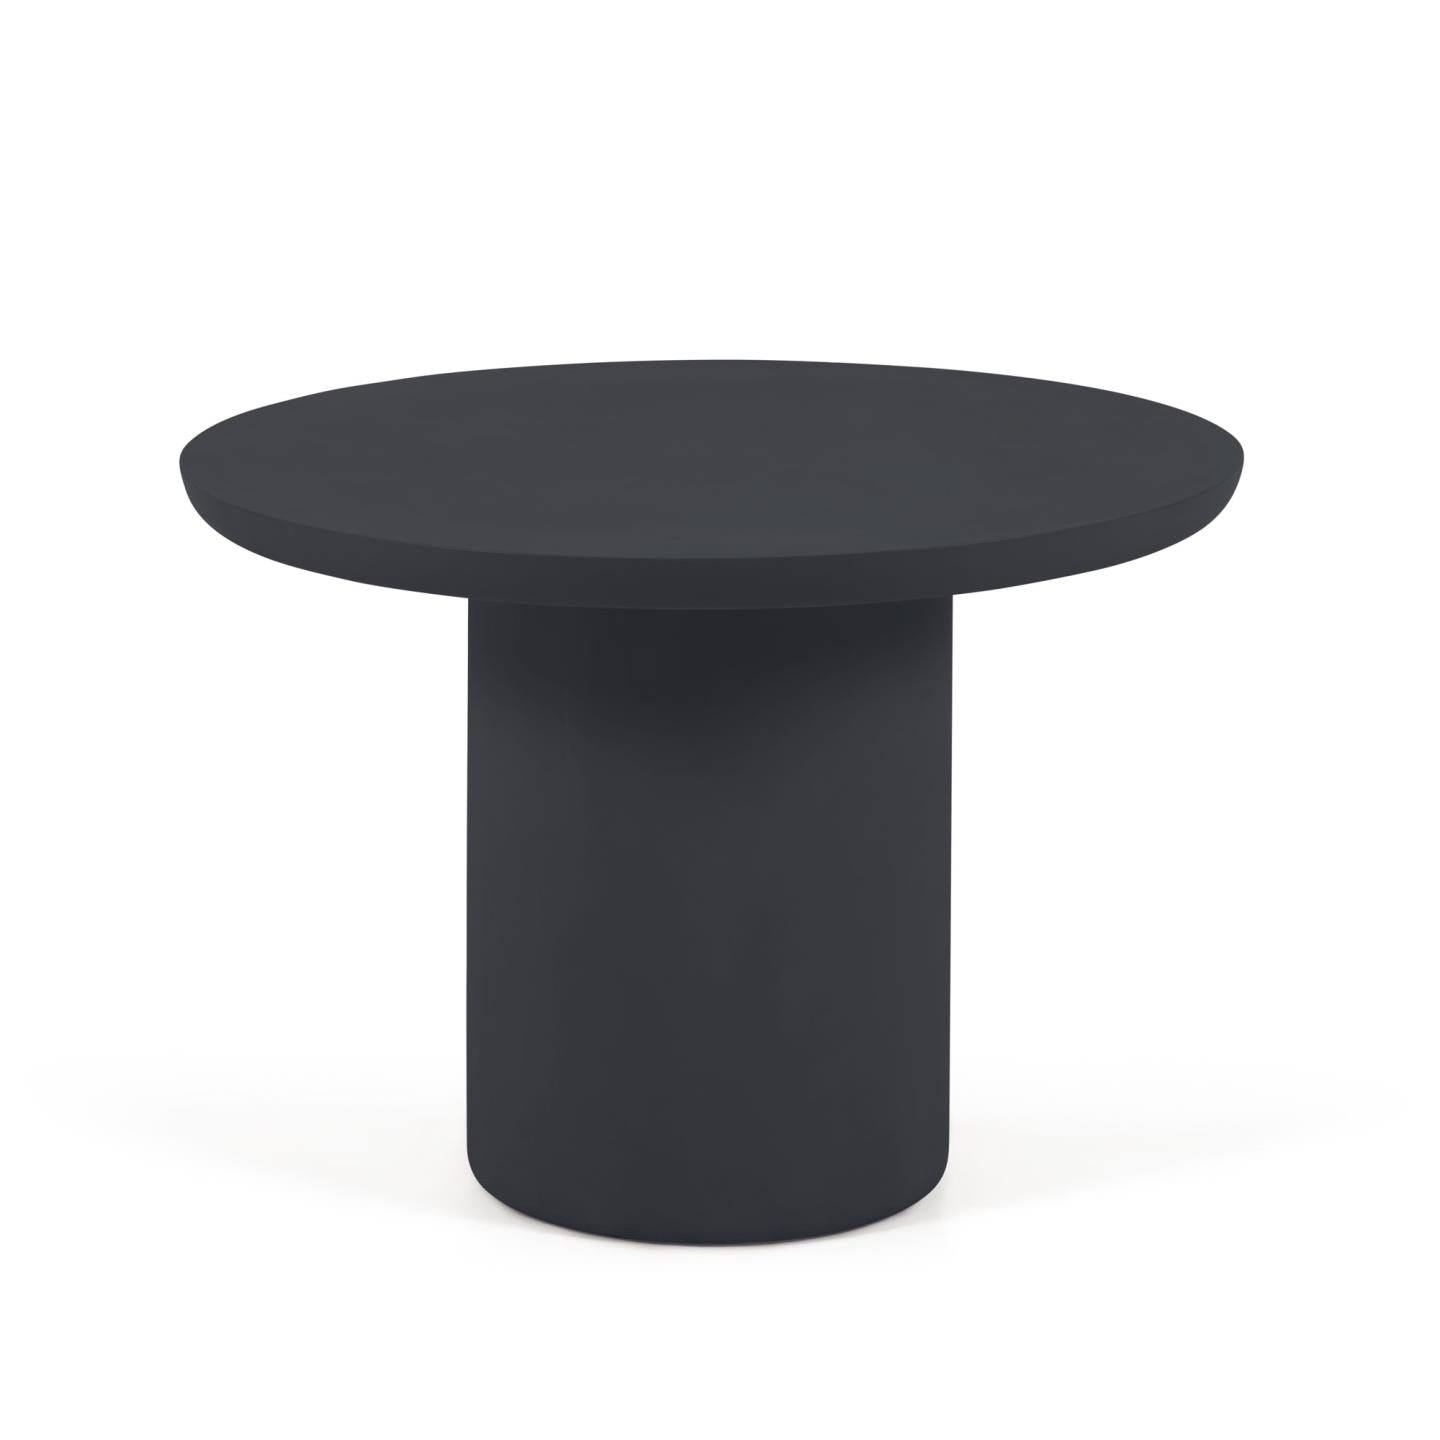 Taimi round outdoor table made of concrete with black finish Ø 110 cm